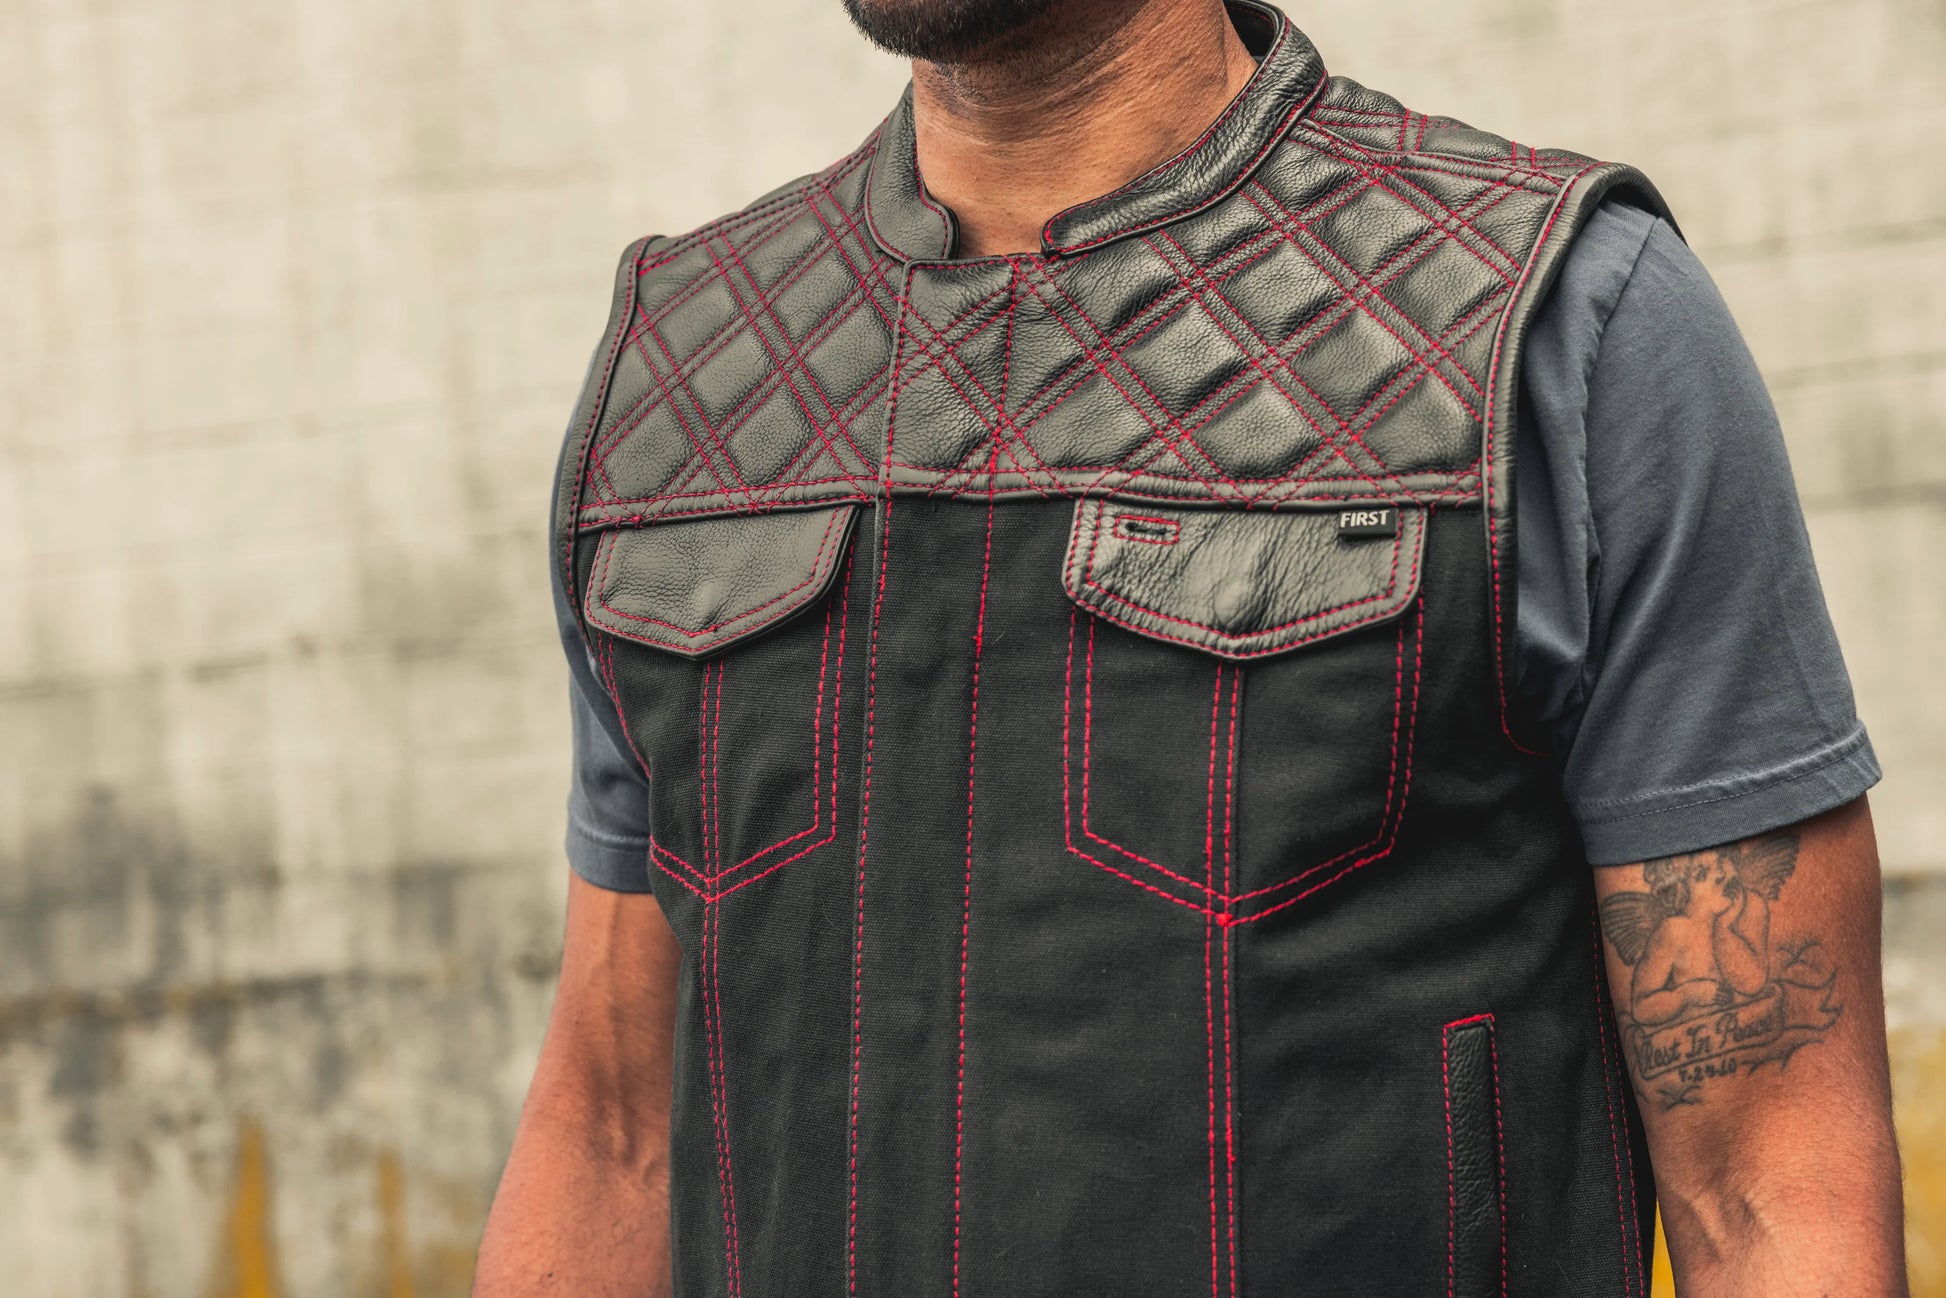 Stylish Club Vest: Elevate Your Look with Confidence